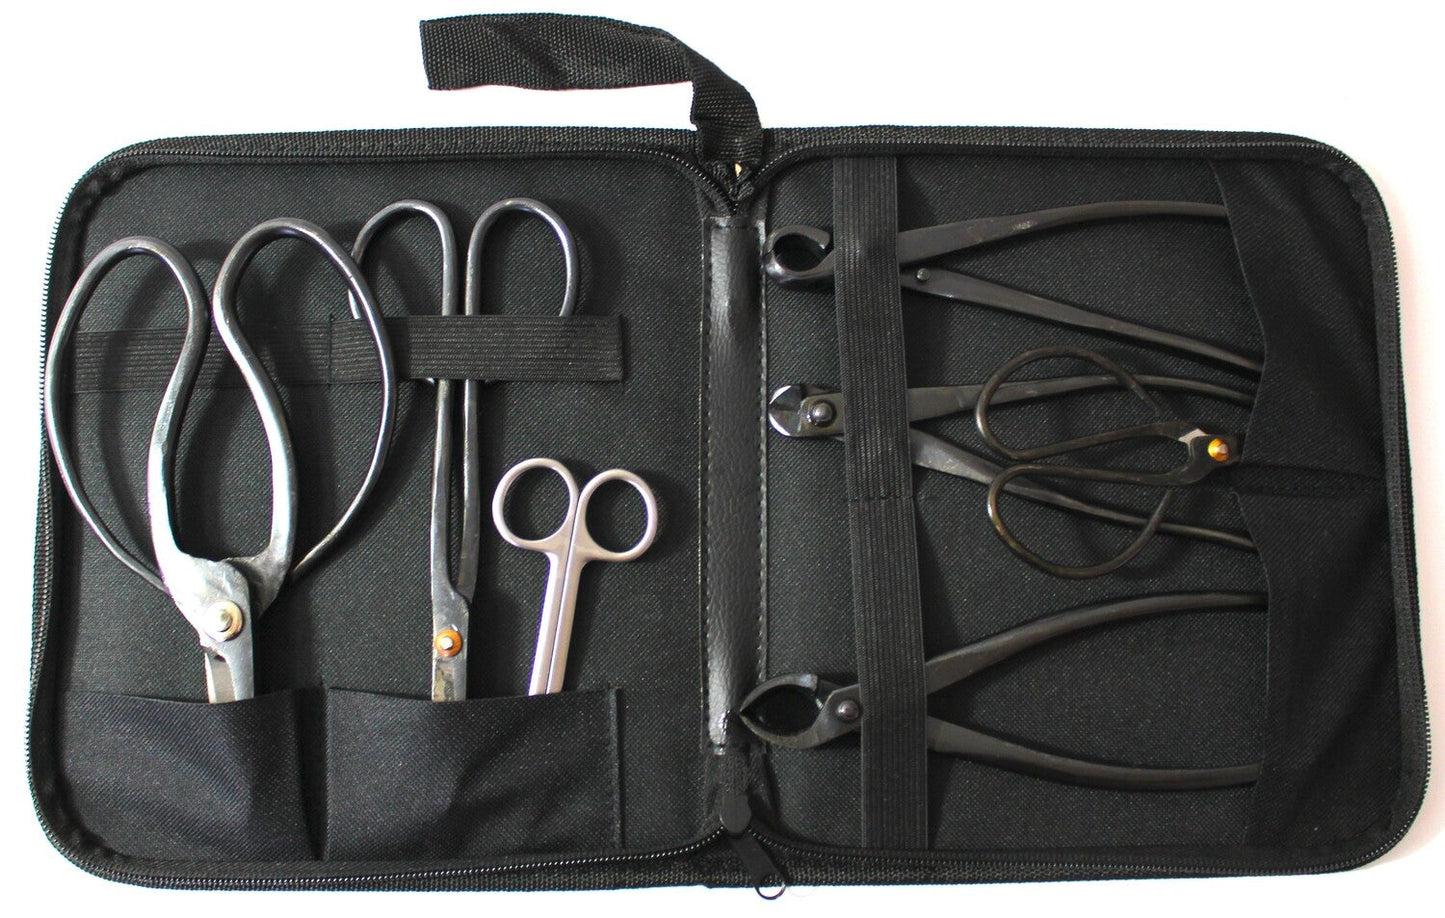 Bonsai Tools and Tool sets - choose the set for you